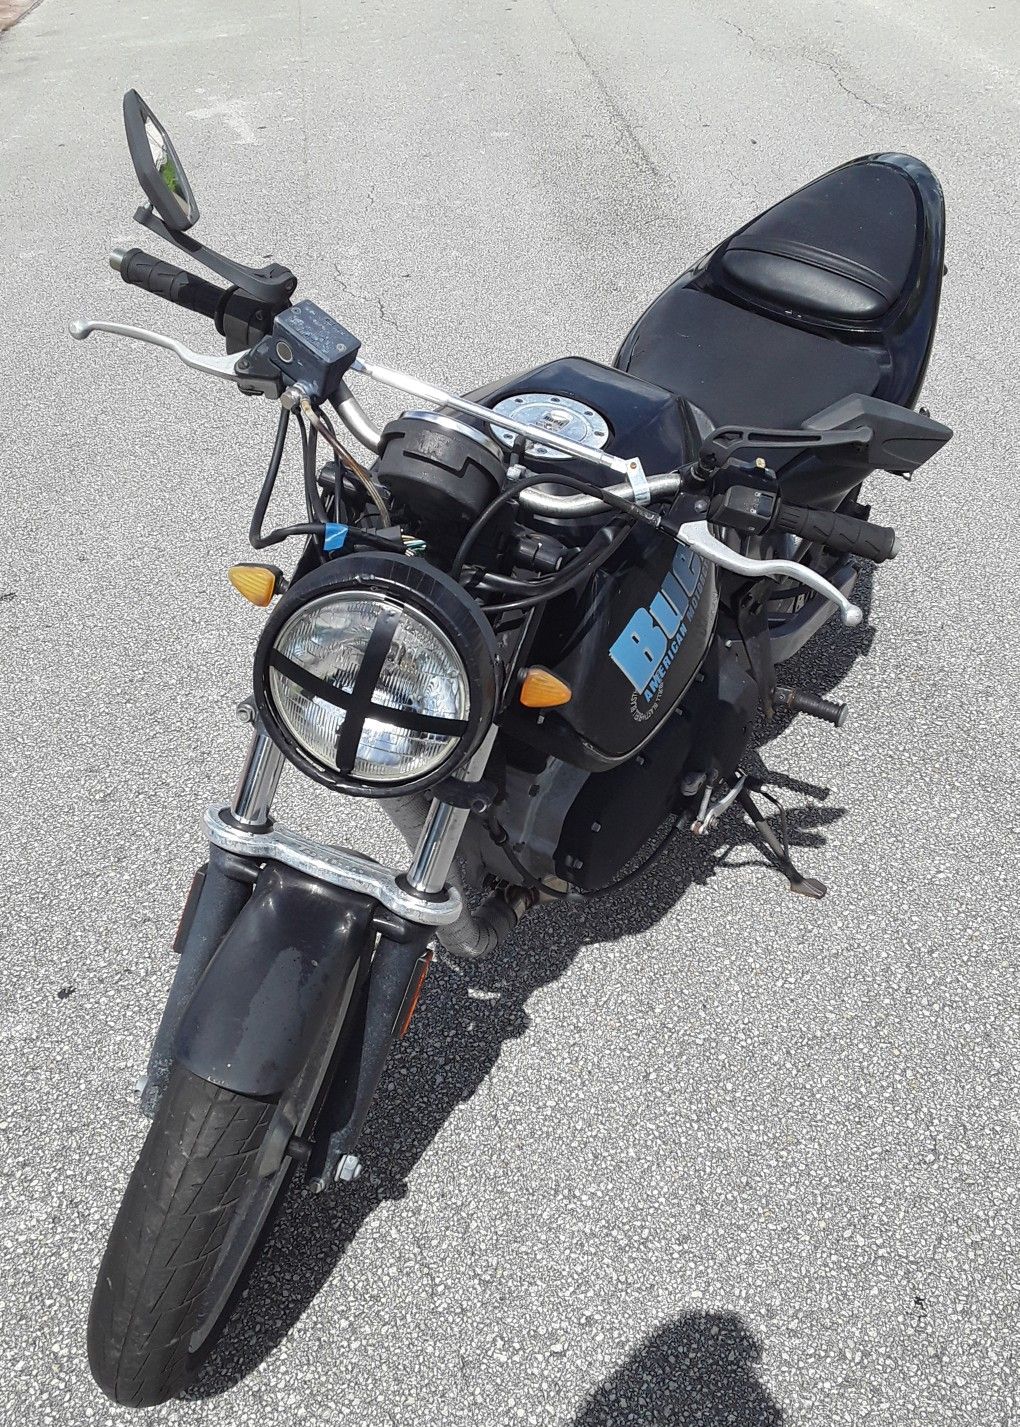 Custom 2006 Buell Blast by Harley Davidson 500cc Motorcycle *Open to Trades* READ DESCRIPTION